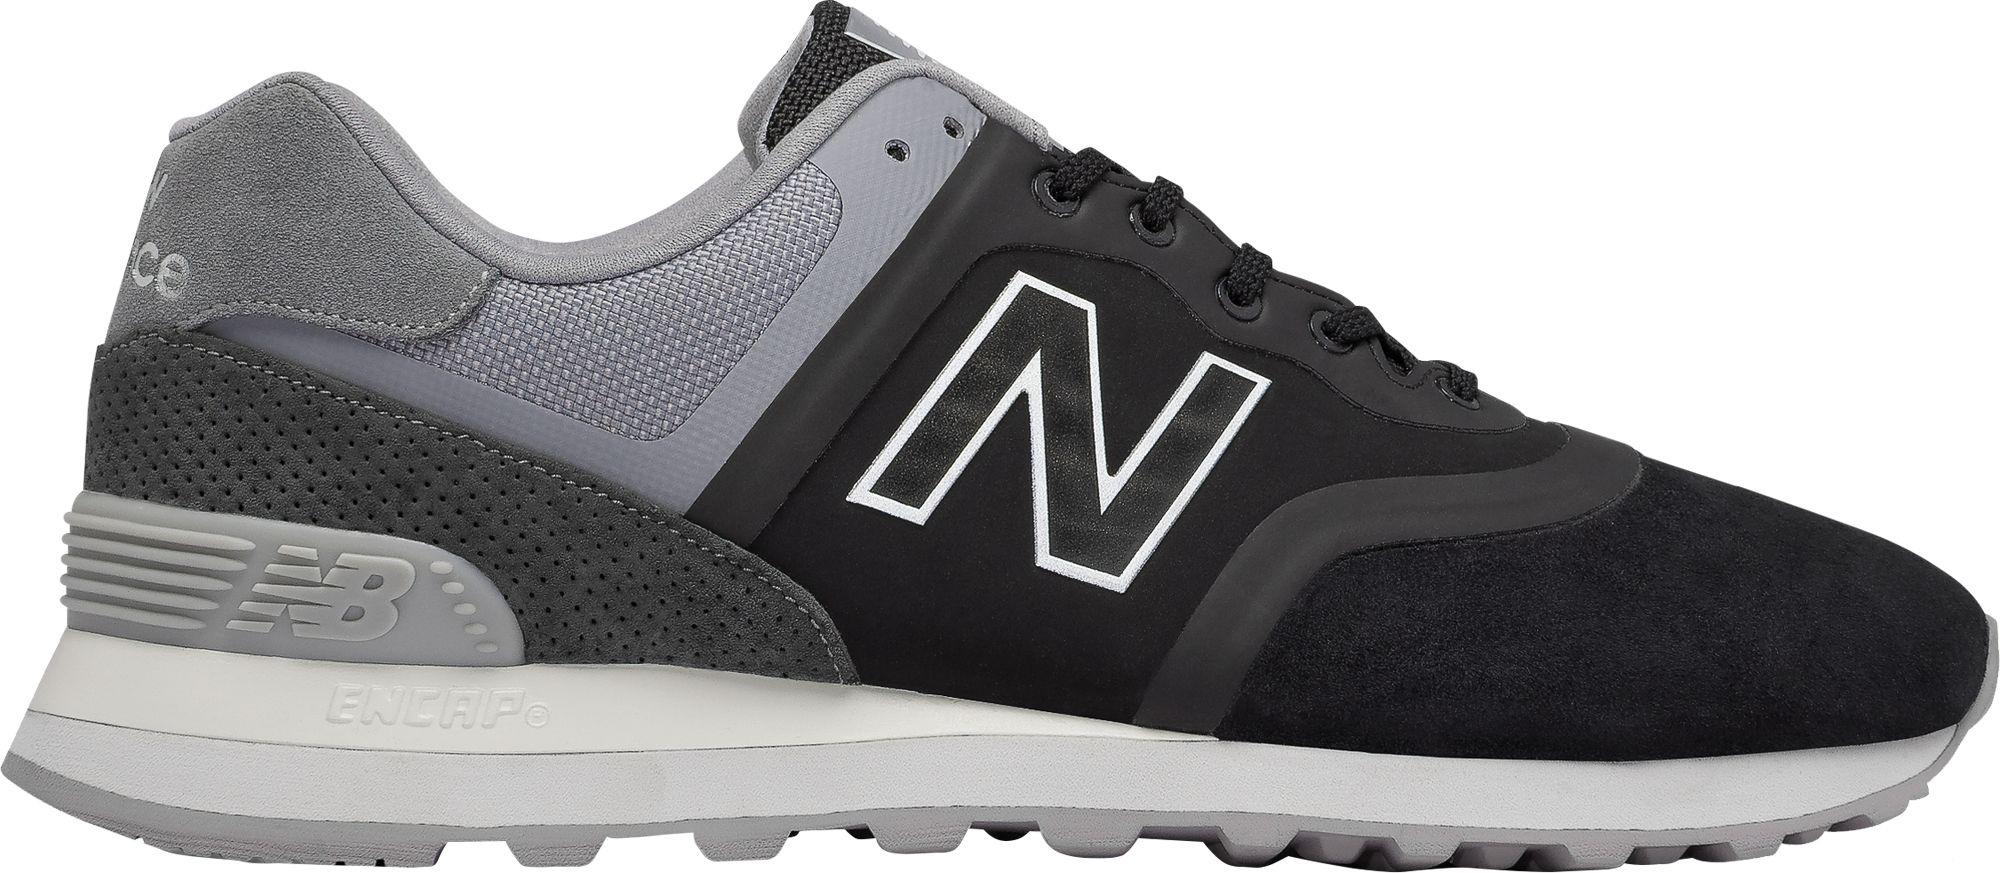 New Balance Rubber 574v2 Shoes in Black 